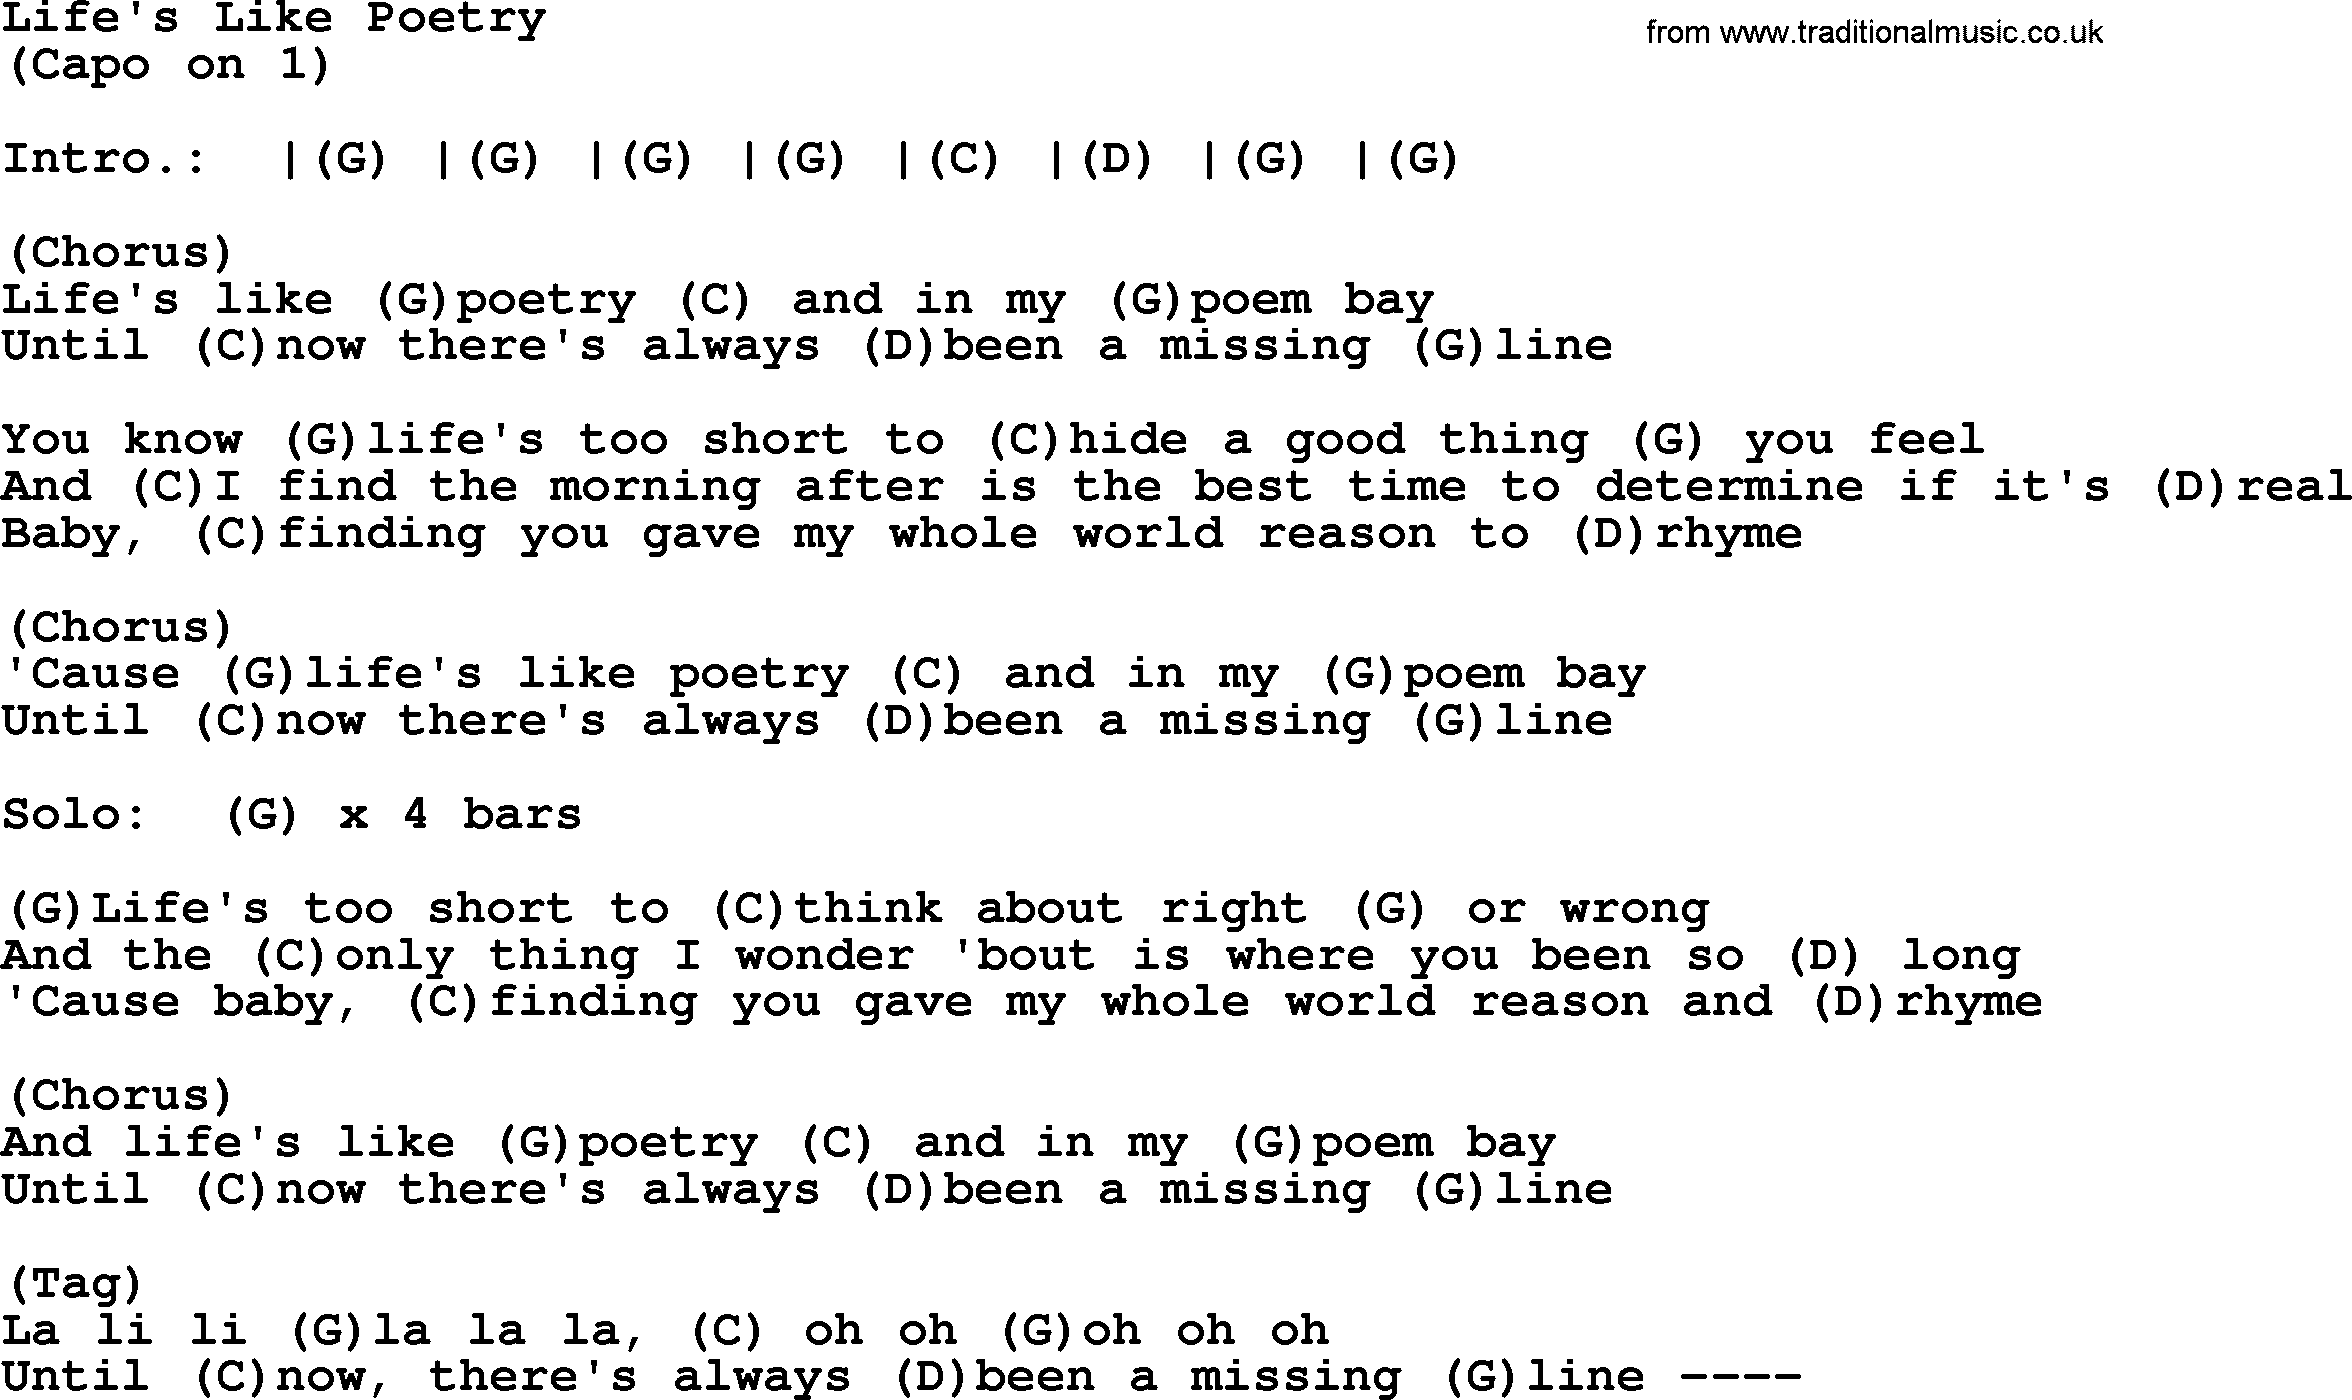 Bluegrass song: Life's Like Poetry, lyrics and chords